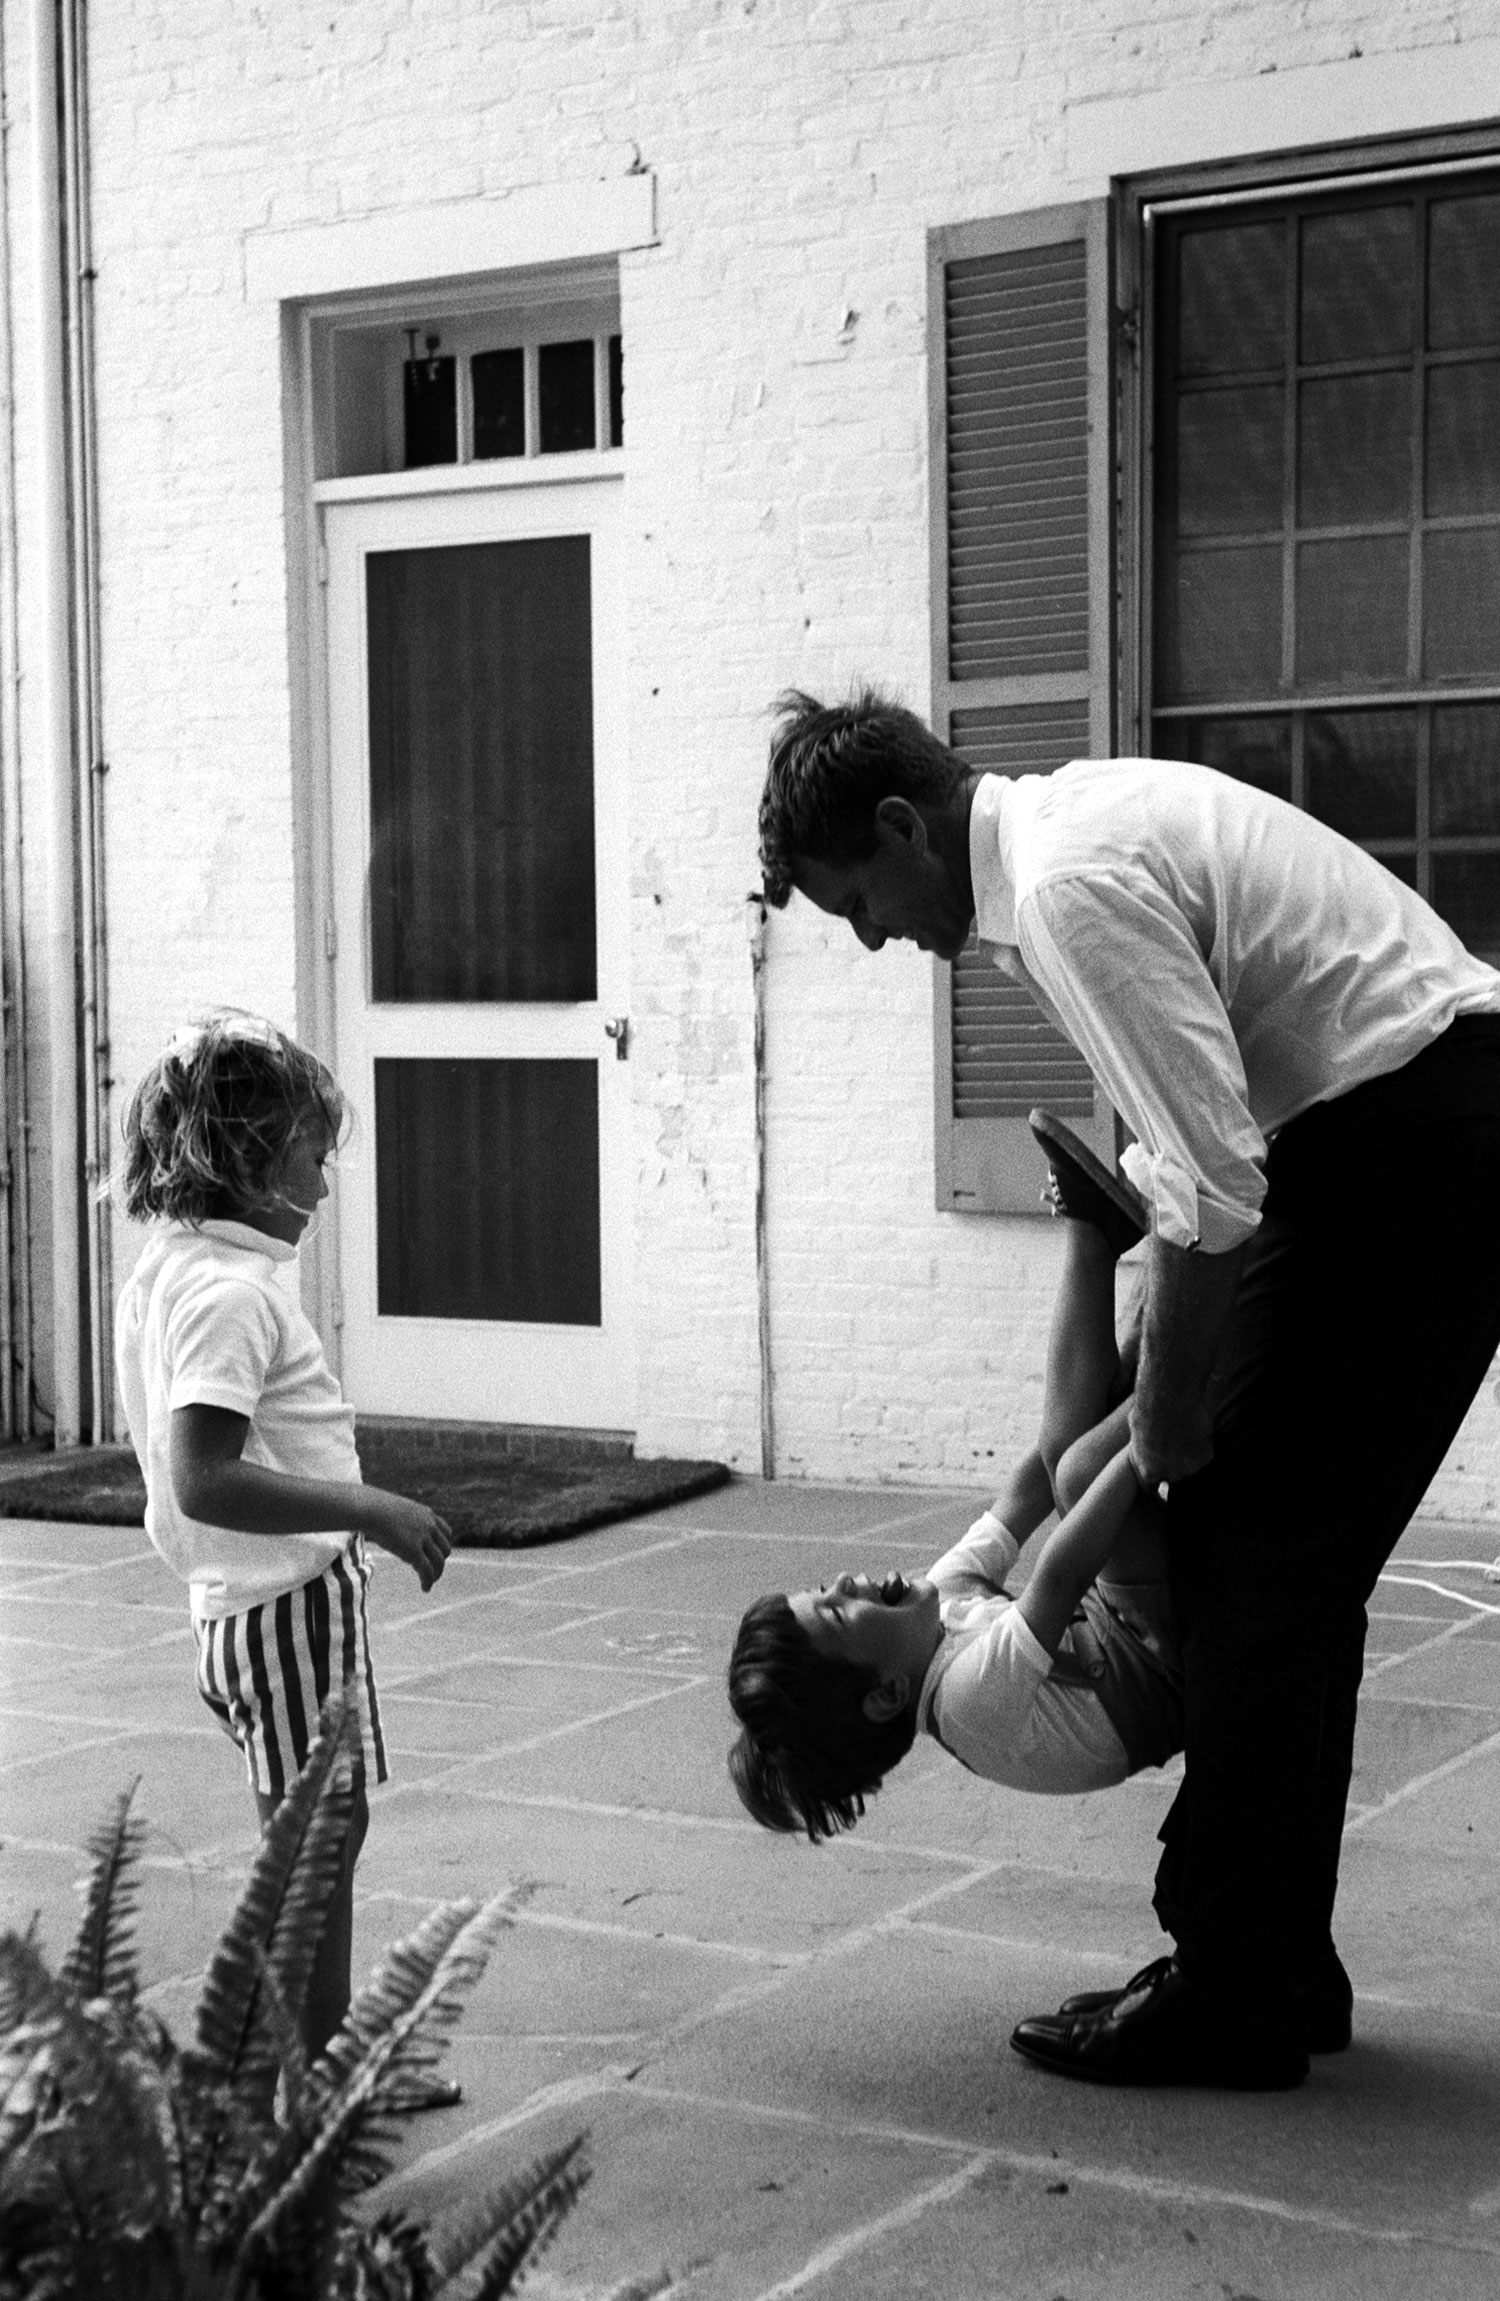 Bob swings his nephew on terrace. 'Jack made John the mischievous, independent boy he is,' says Jackie Kennedy. 'Bobby is keeping that alive.'